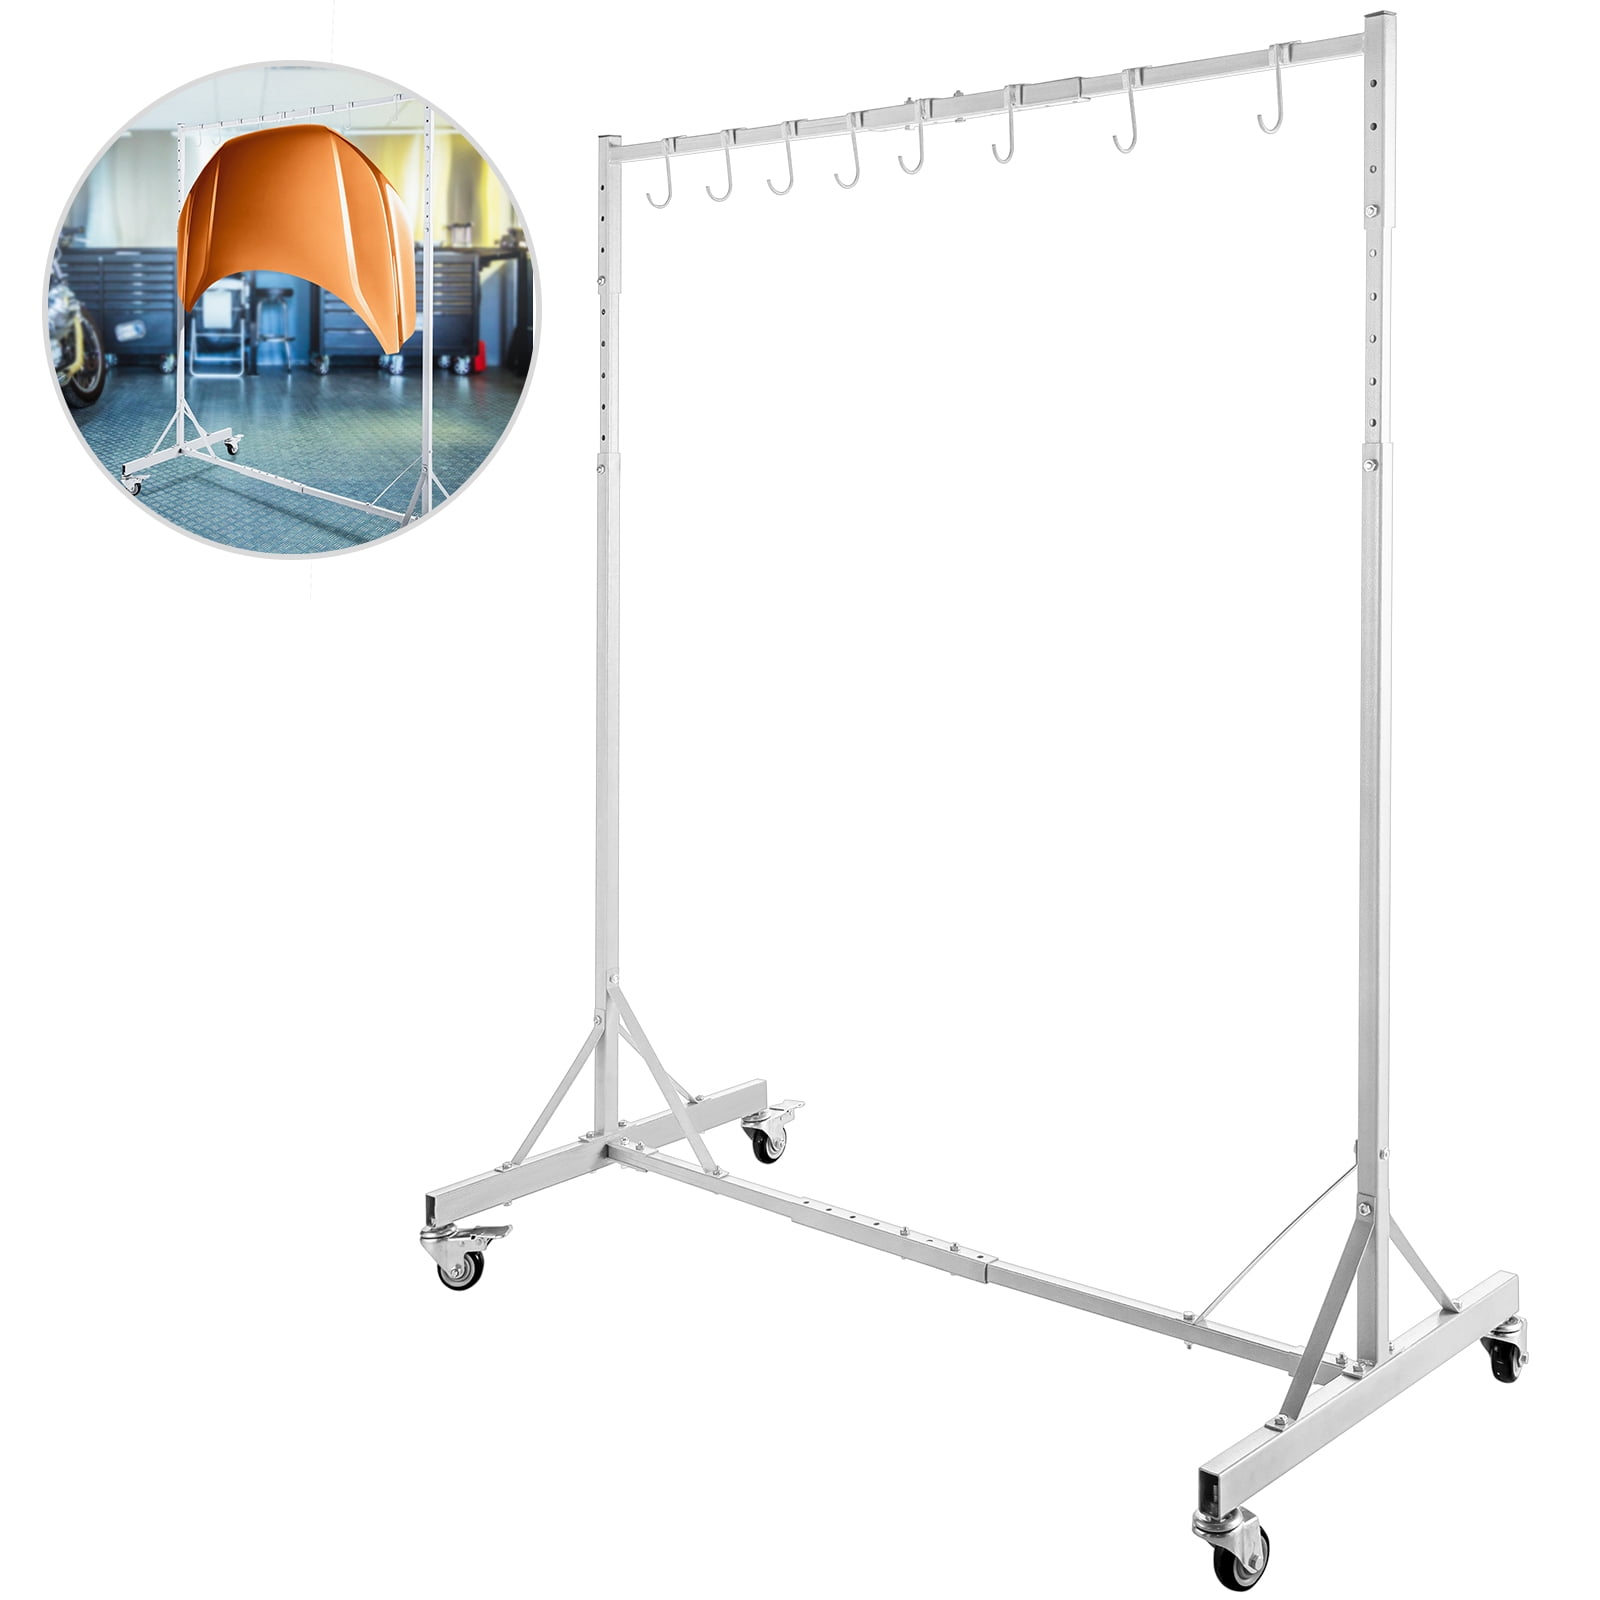 VCT 7ft Adjustable Paint Hanger Auto Body Drying Painting Stand with  Casters for Easy Mobility Around Shop